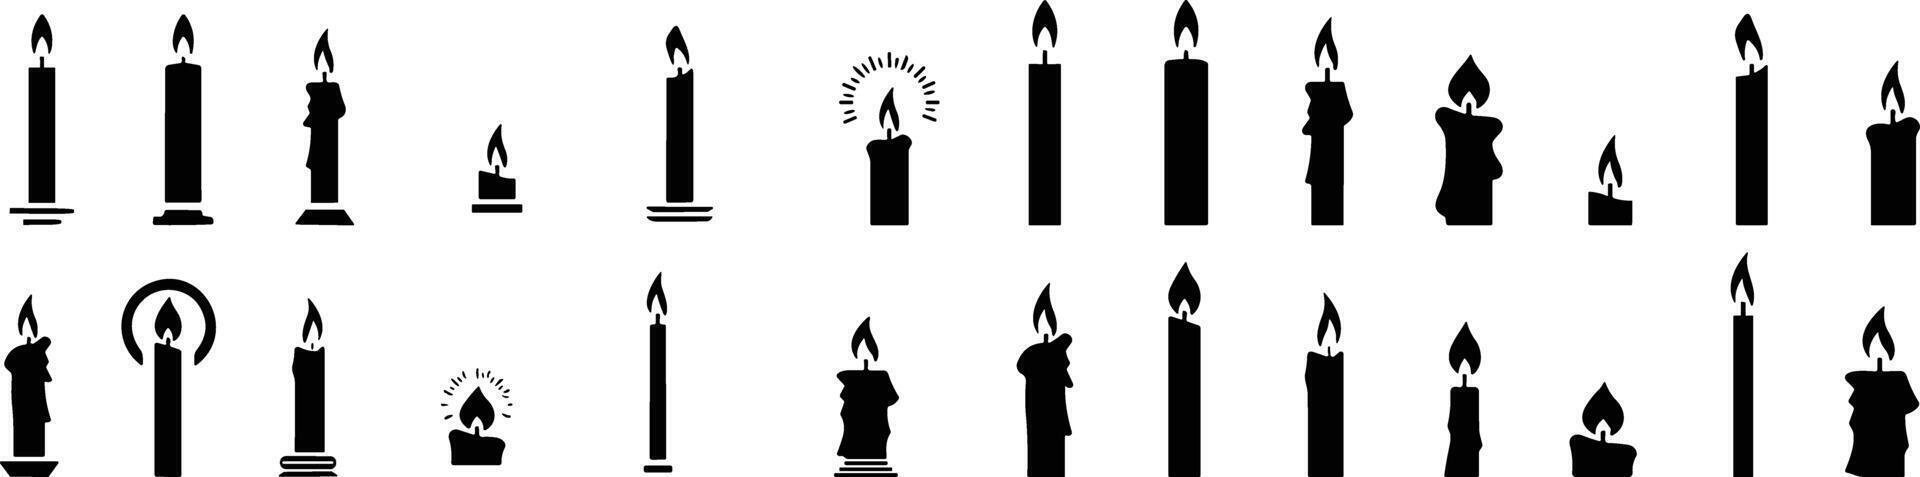 Set of candles for birthday cake or pie vector illustration. Holiday candle collection with burning flames in night, candlelight on wicks, celebration objects